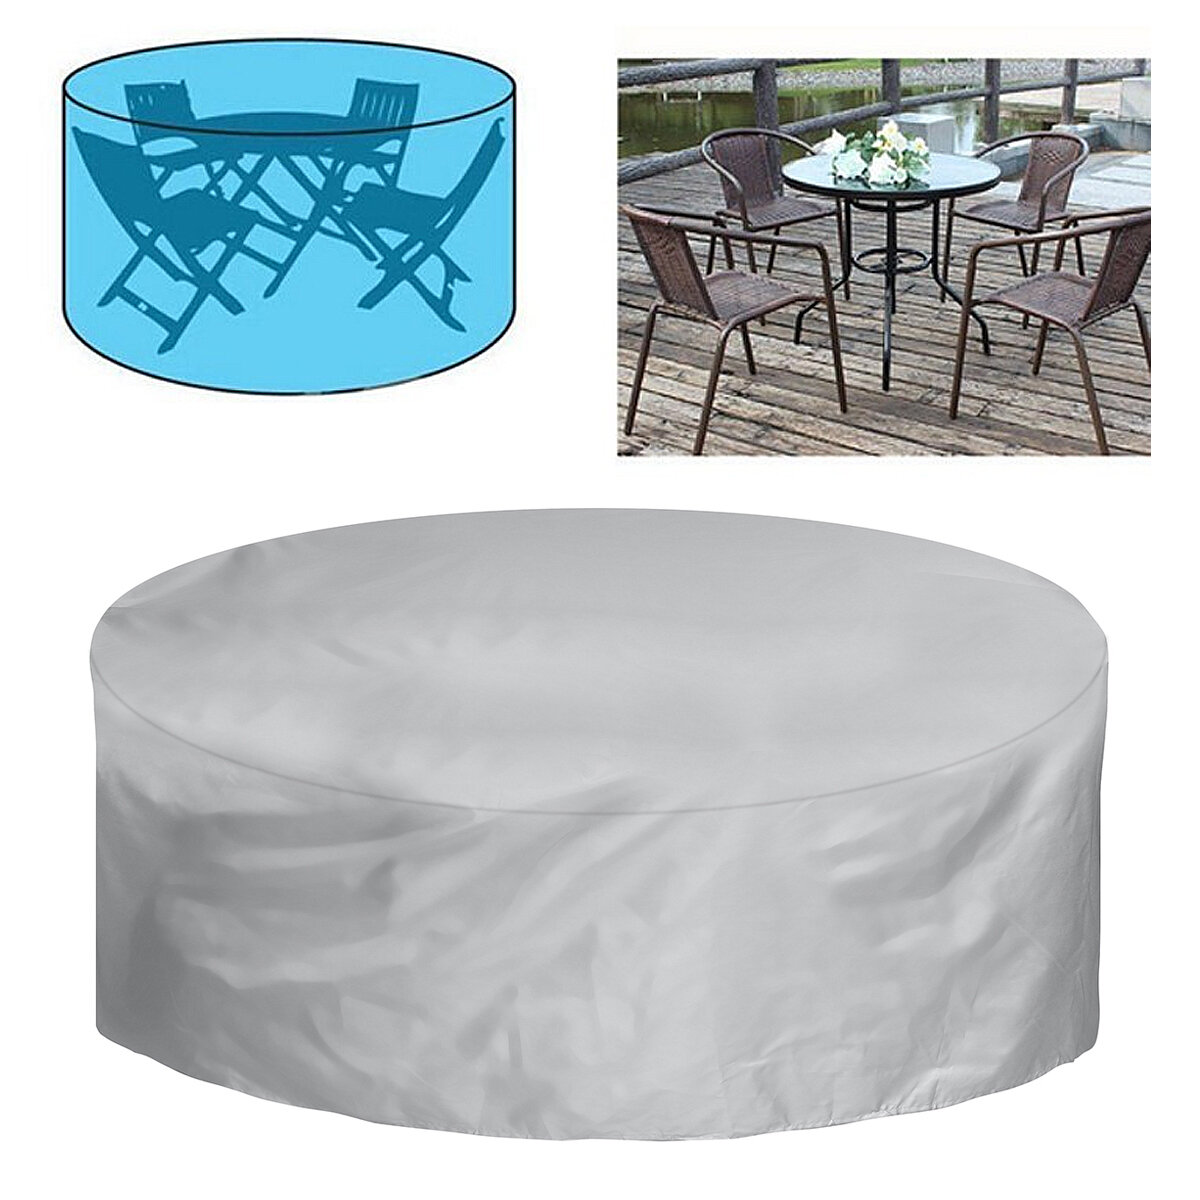 210D Oxford Furniture Cover Round Protective Cover Tarpaulin Sun Cover Water and Sun Protection Furniture Cover